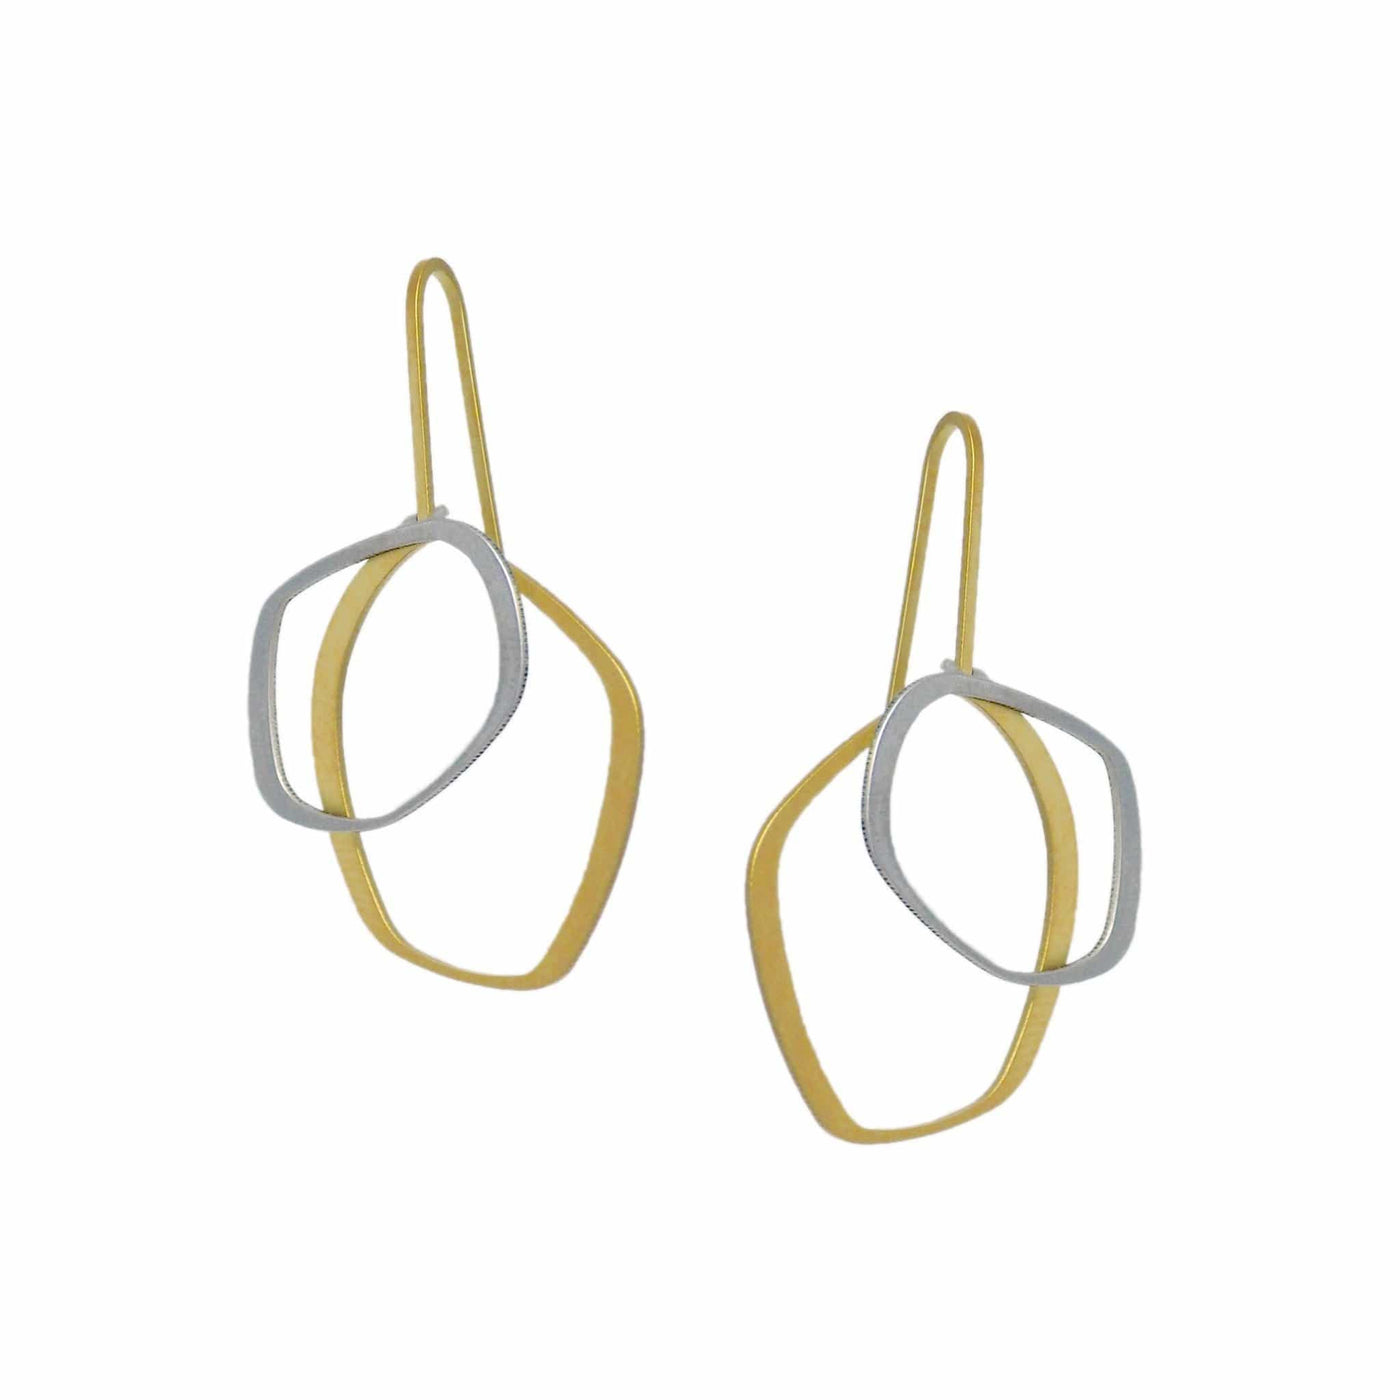 X2 Small Outline Earrings - Gold/ Raw - inSync design